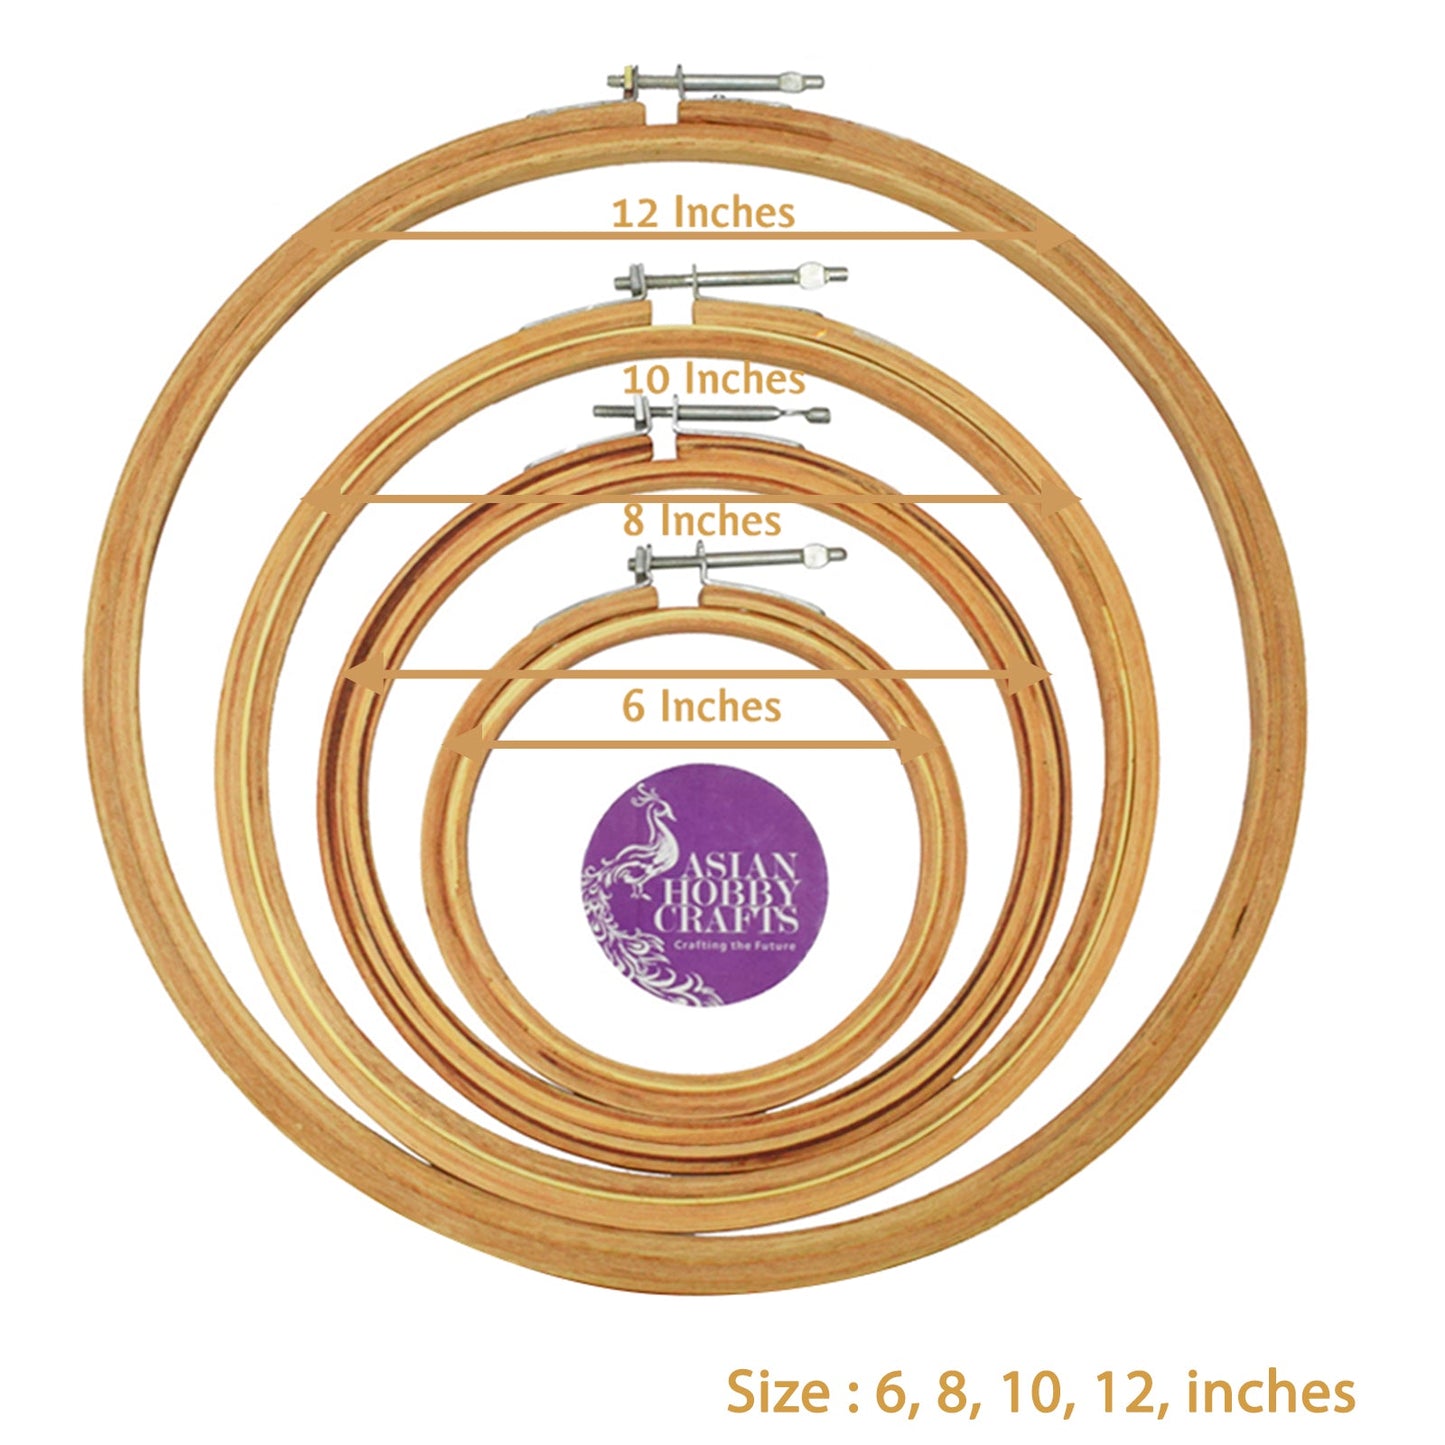 Wooden Embroidery Hoop Combo 6,8,10,12 Inch, Pack of 4 with Iron Key